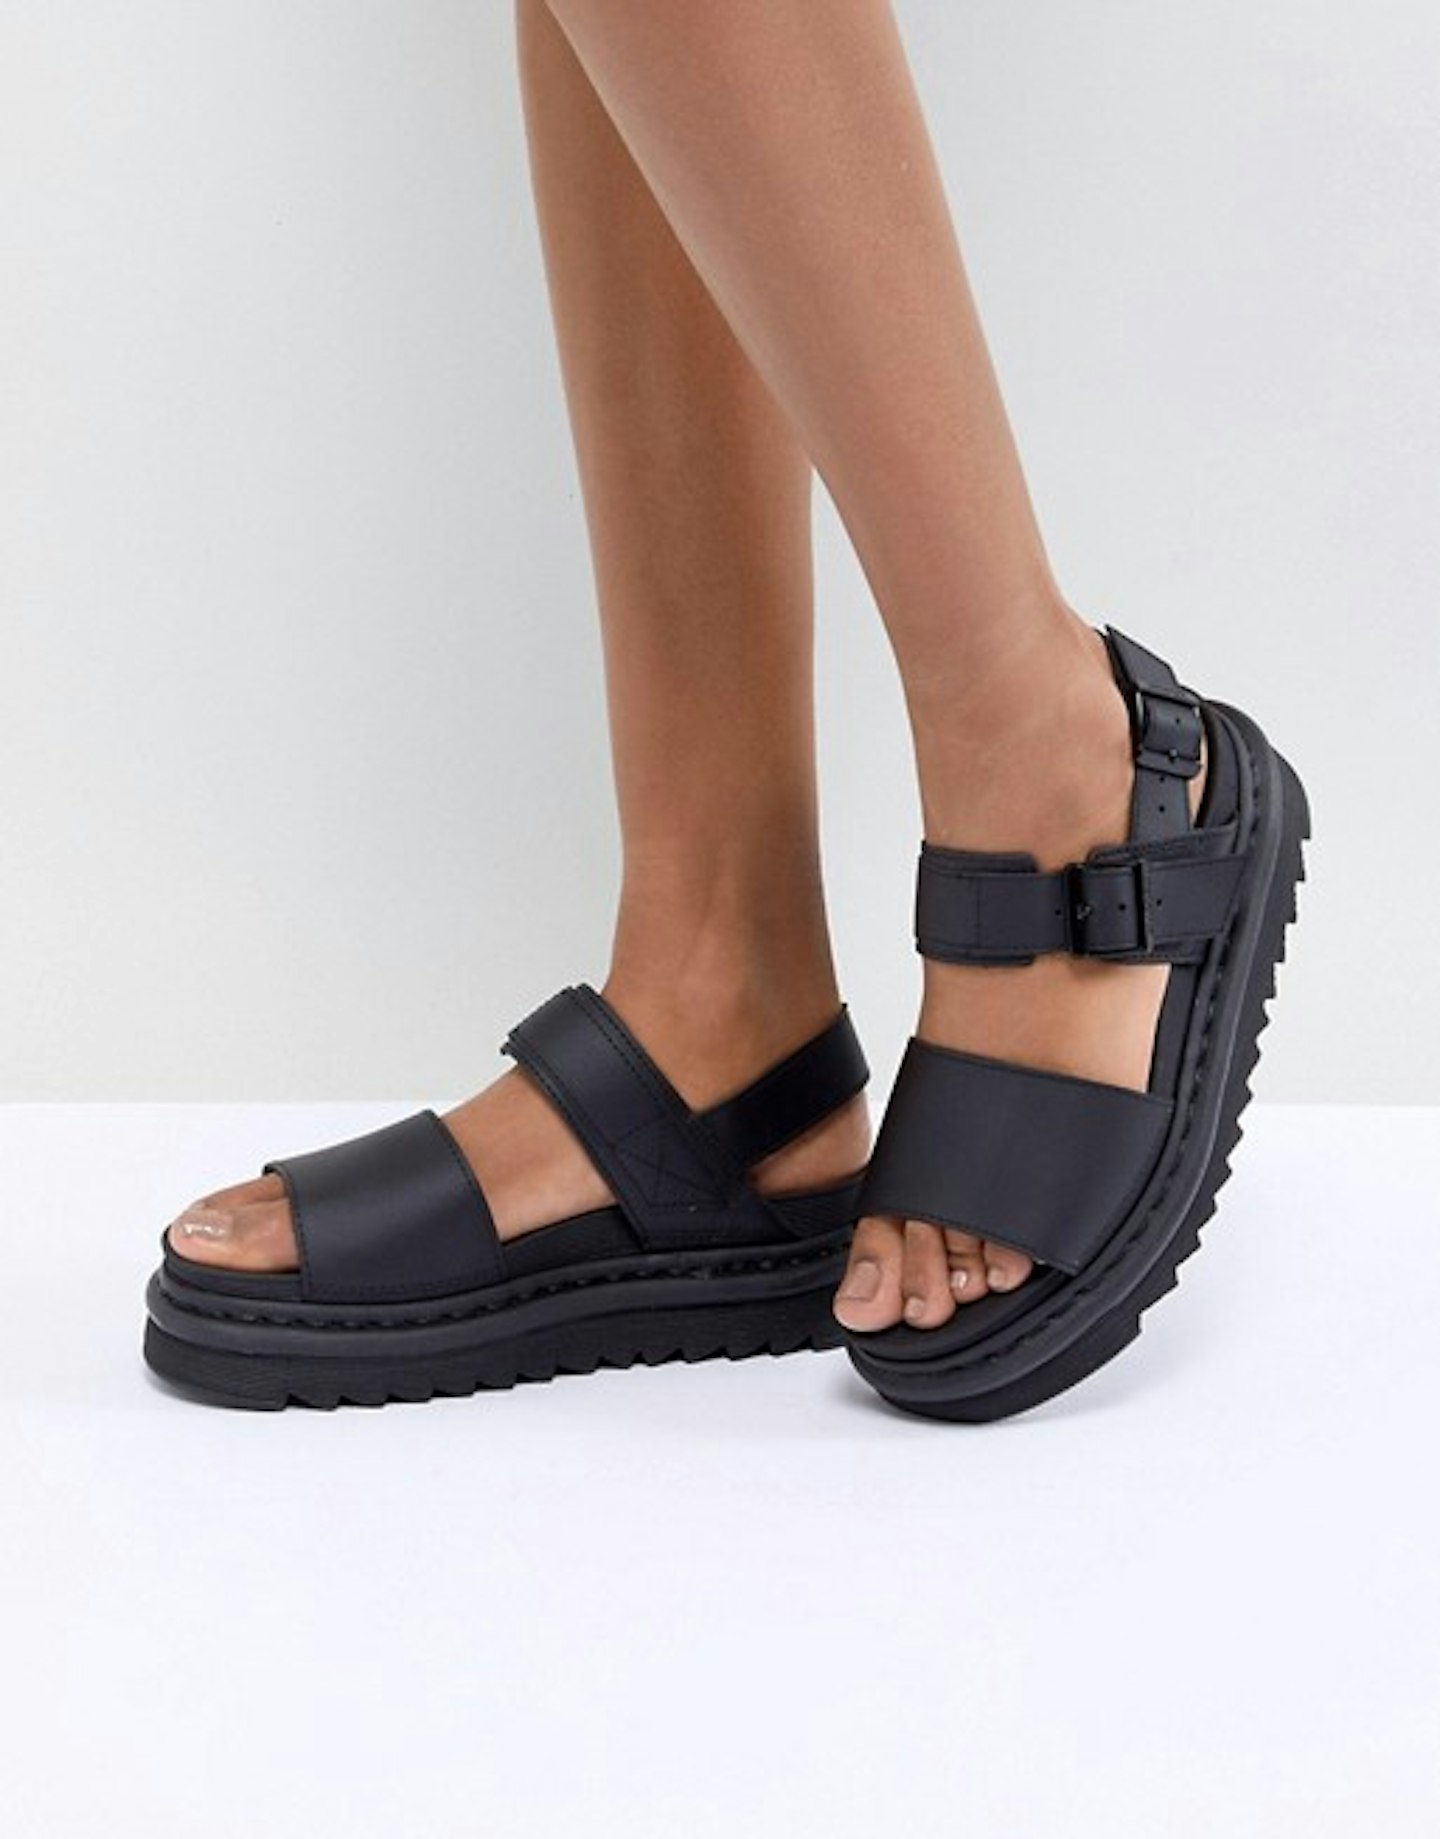 Dad Sandals For Women: The Best, Most Comfortable Pairs To Buy ...